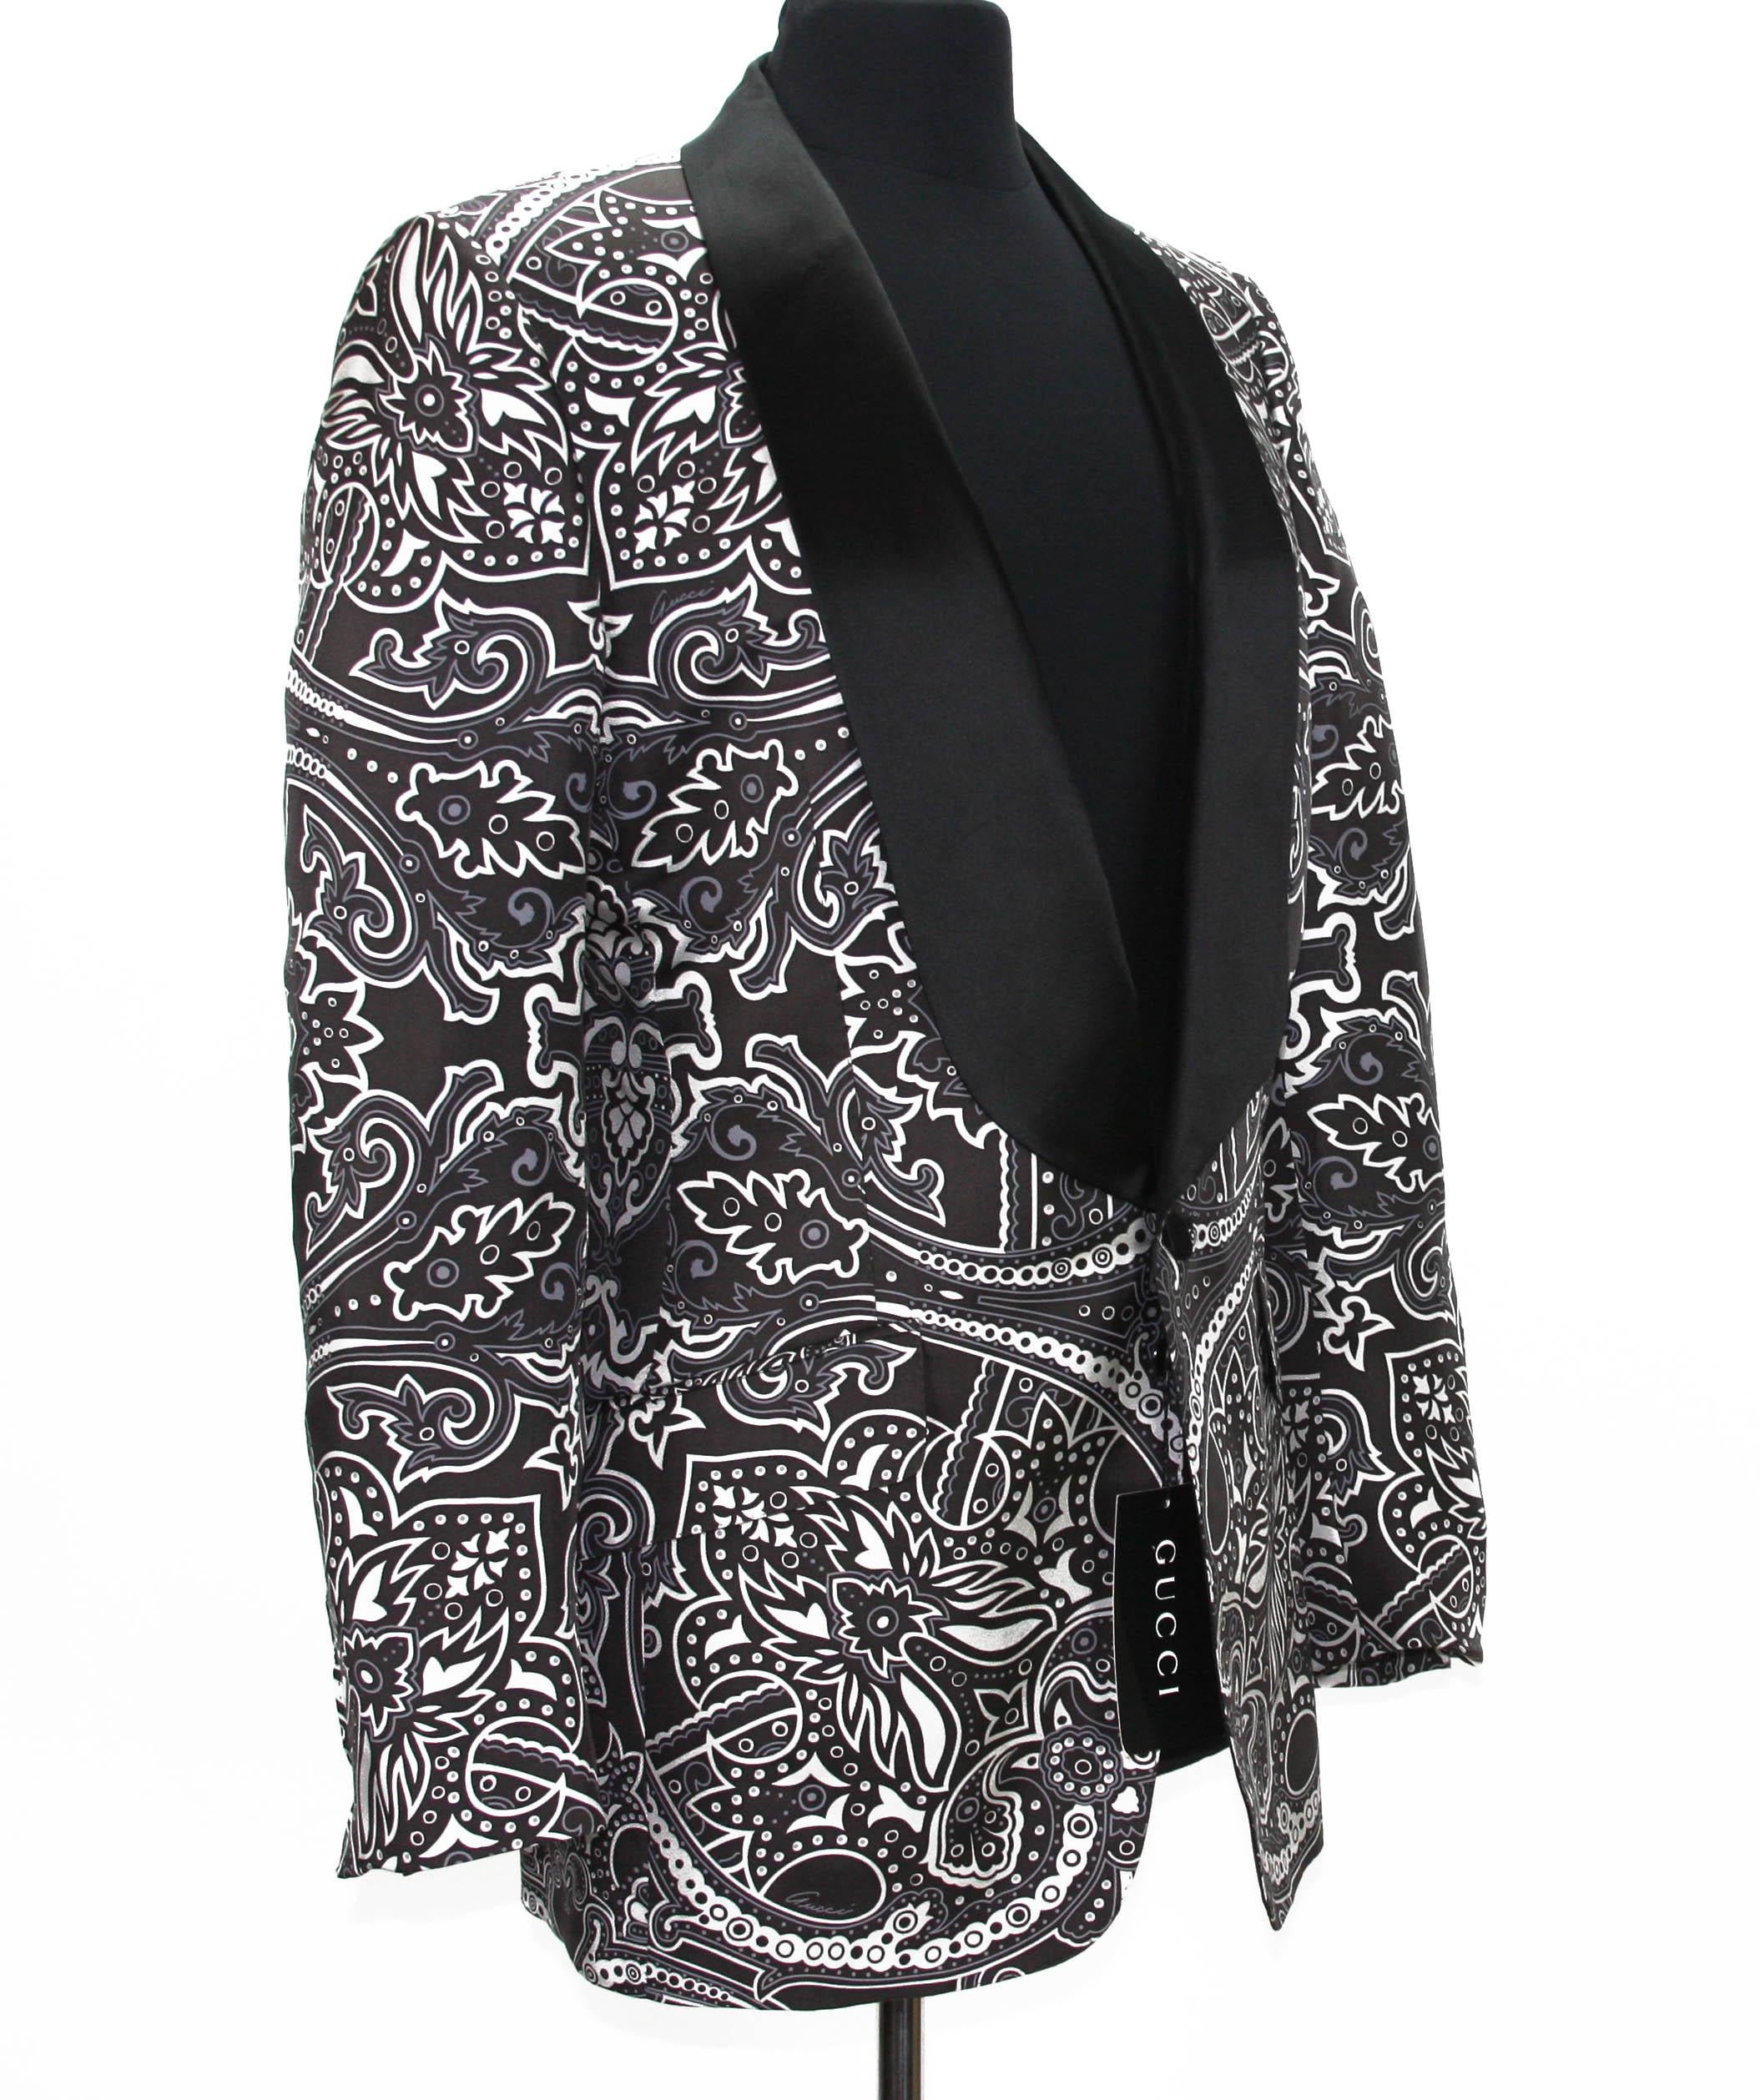 New and Rare Tom Ford for Gucci Silk Cocktail Evening Blazer Jacket
Spring / Summer 2004 Runway Collection
Designer size 46 R - US 36 R
100% Silk, Brown, White and Gray Colors, Black Shawl Lapel, Single Button Closure.
Chest Pocket, Two Flap